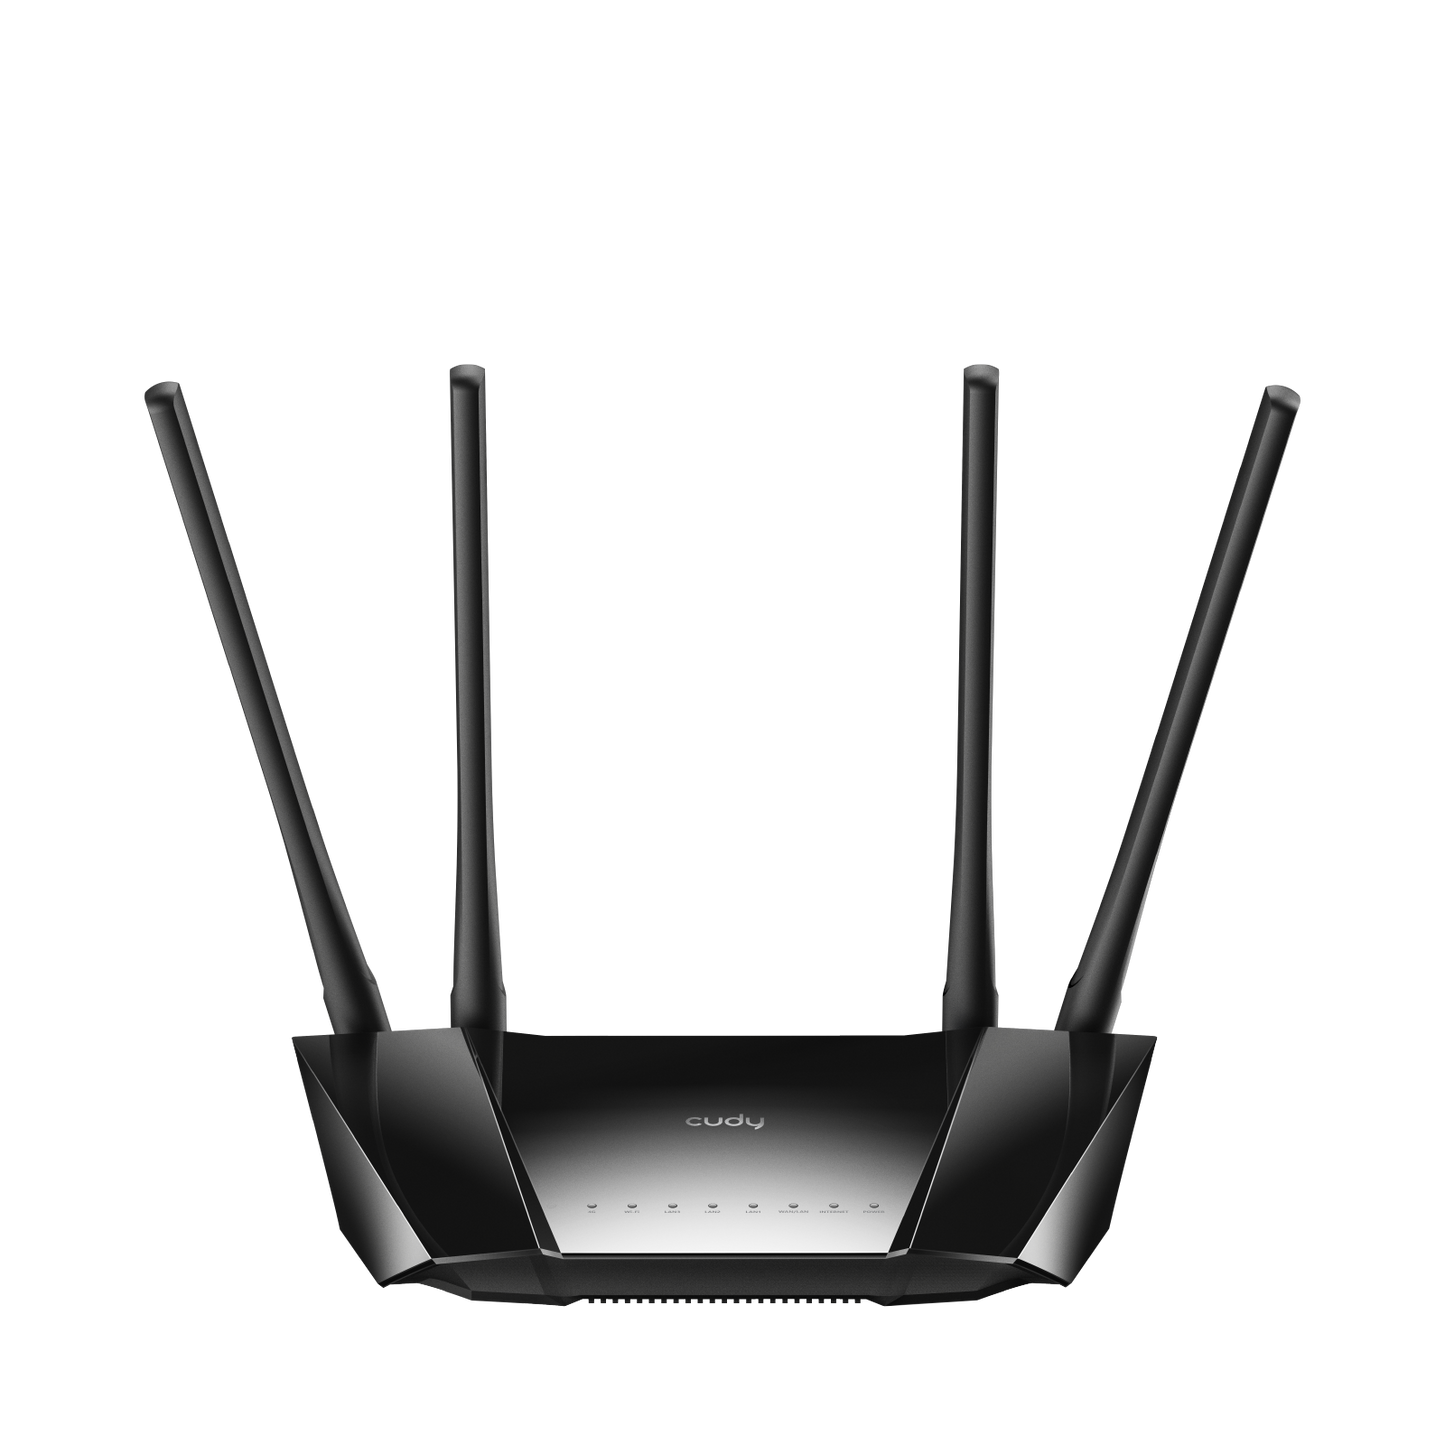 4G N300 Wi-Fi Router, LT400 1.0